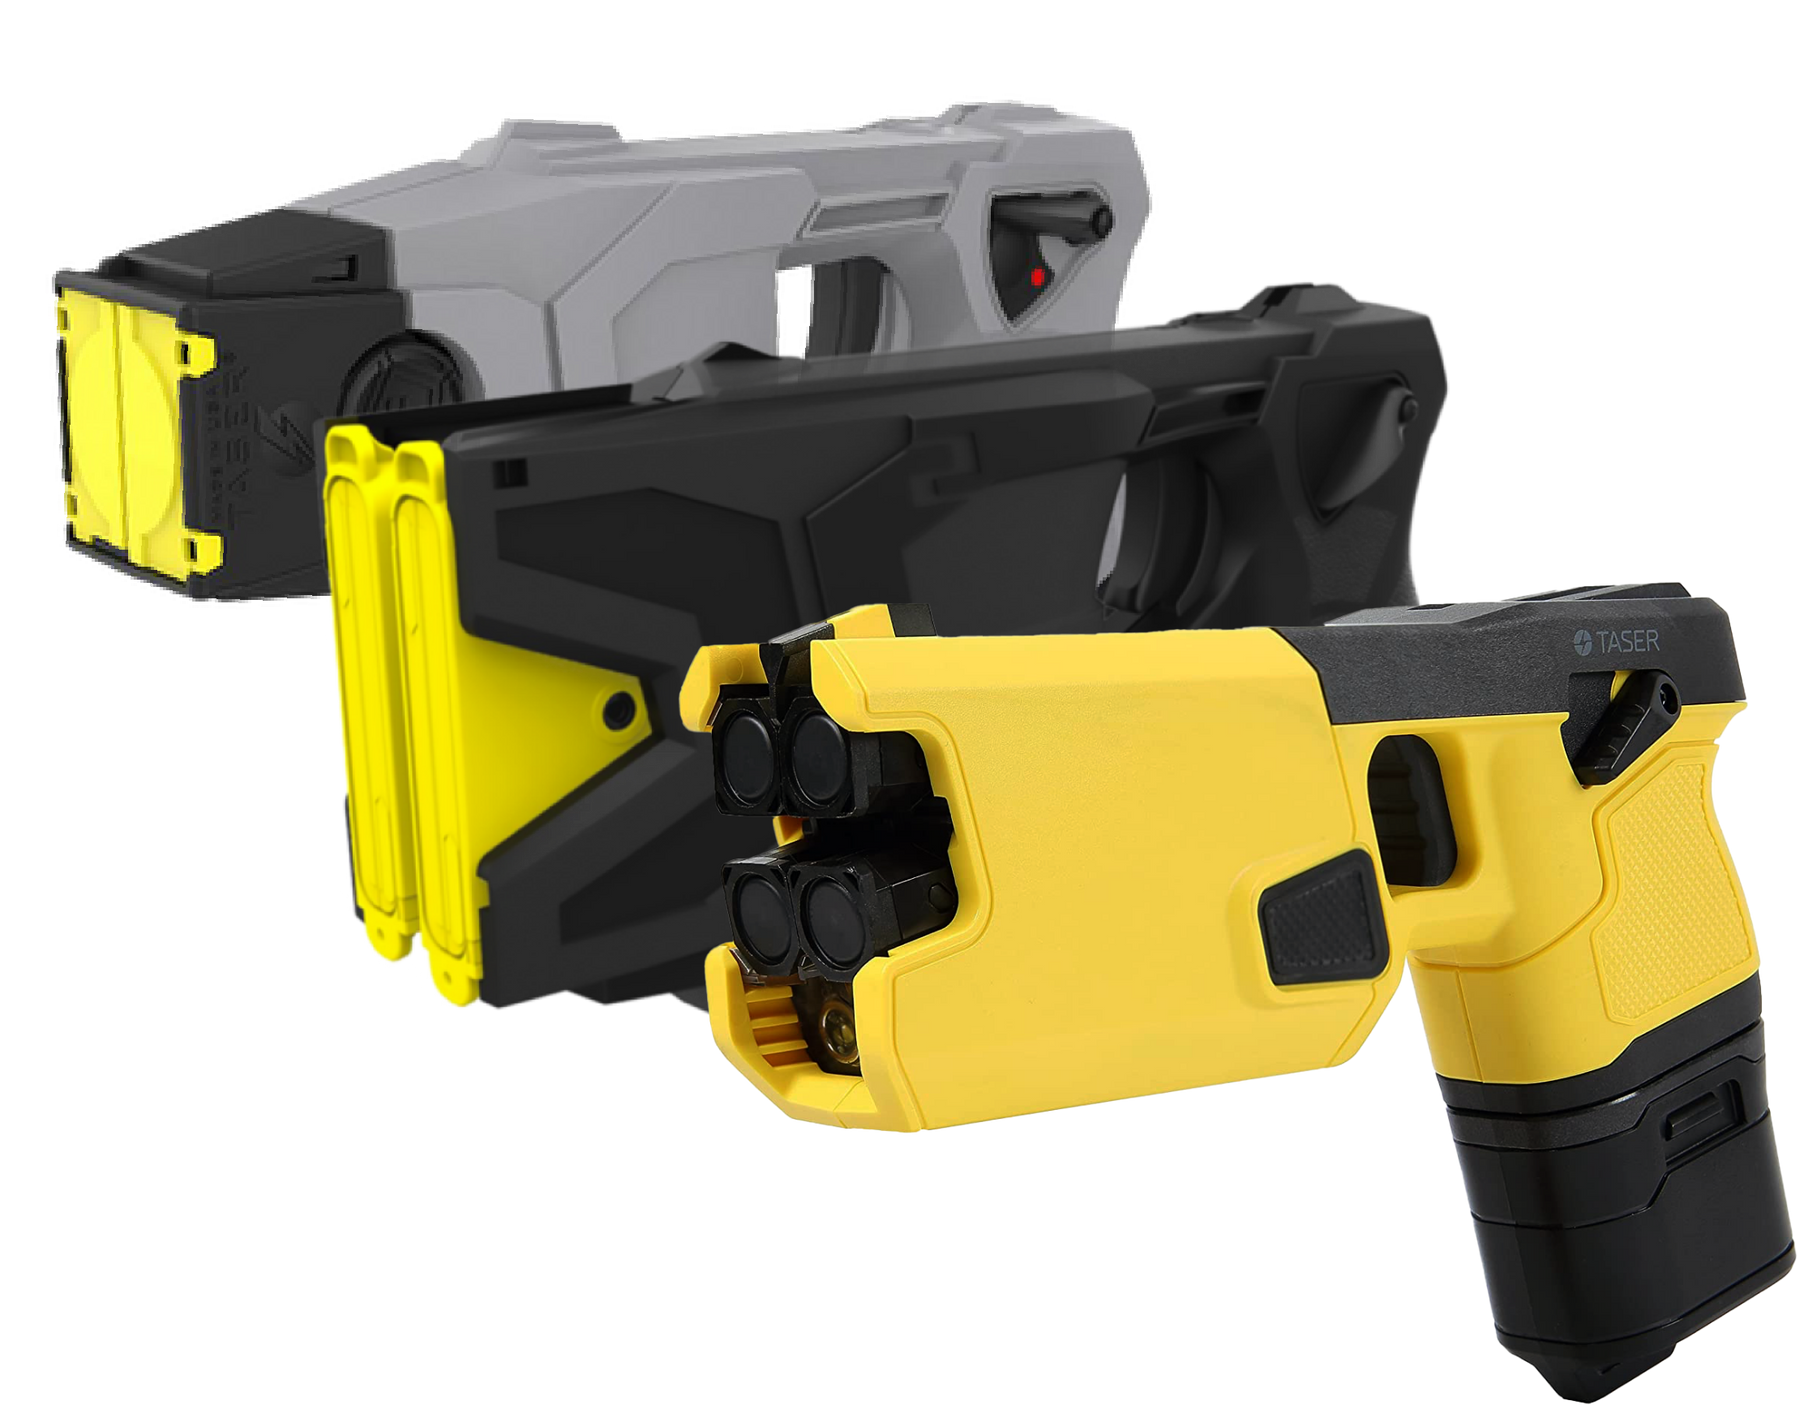 Tasers – Proteccion Total